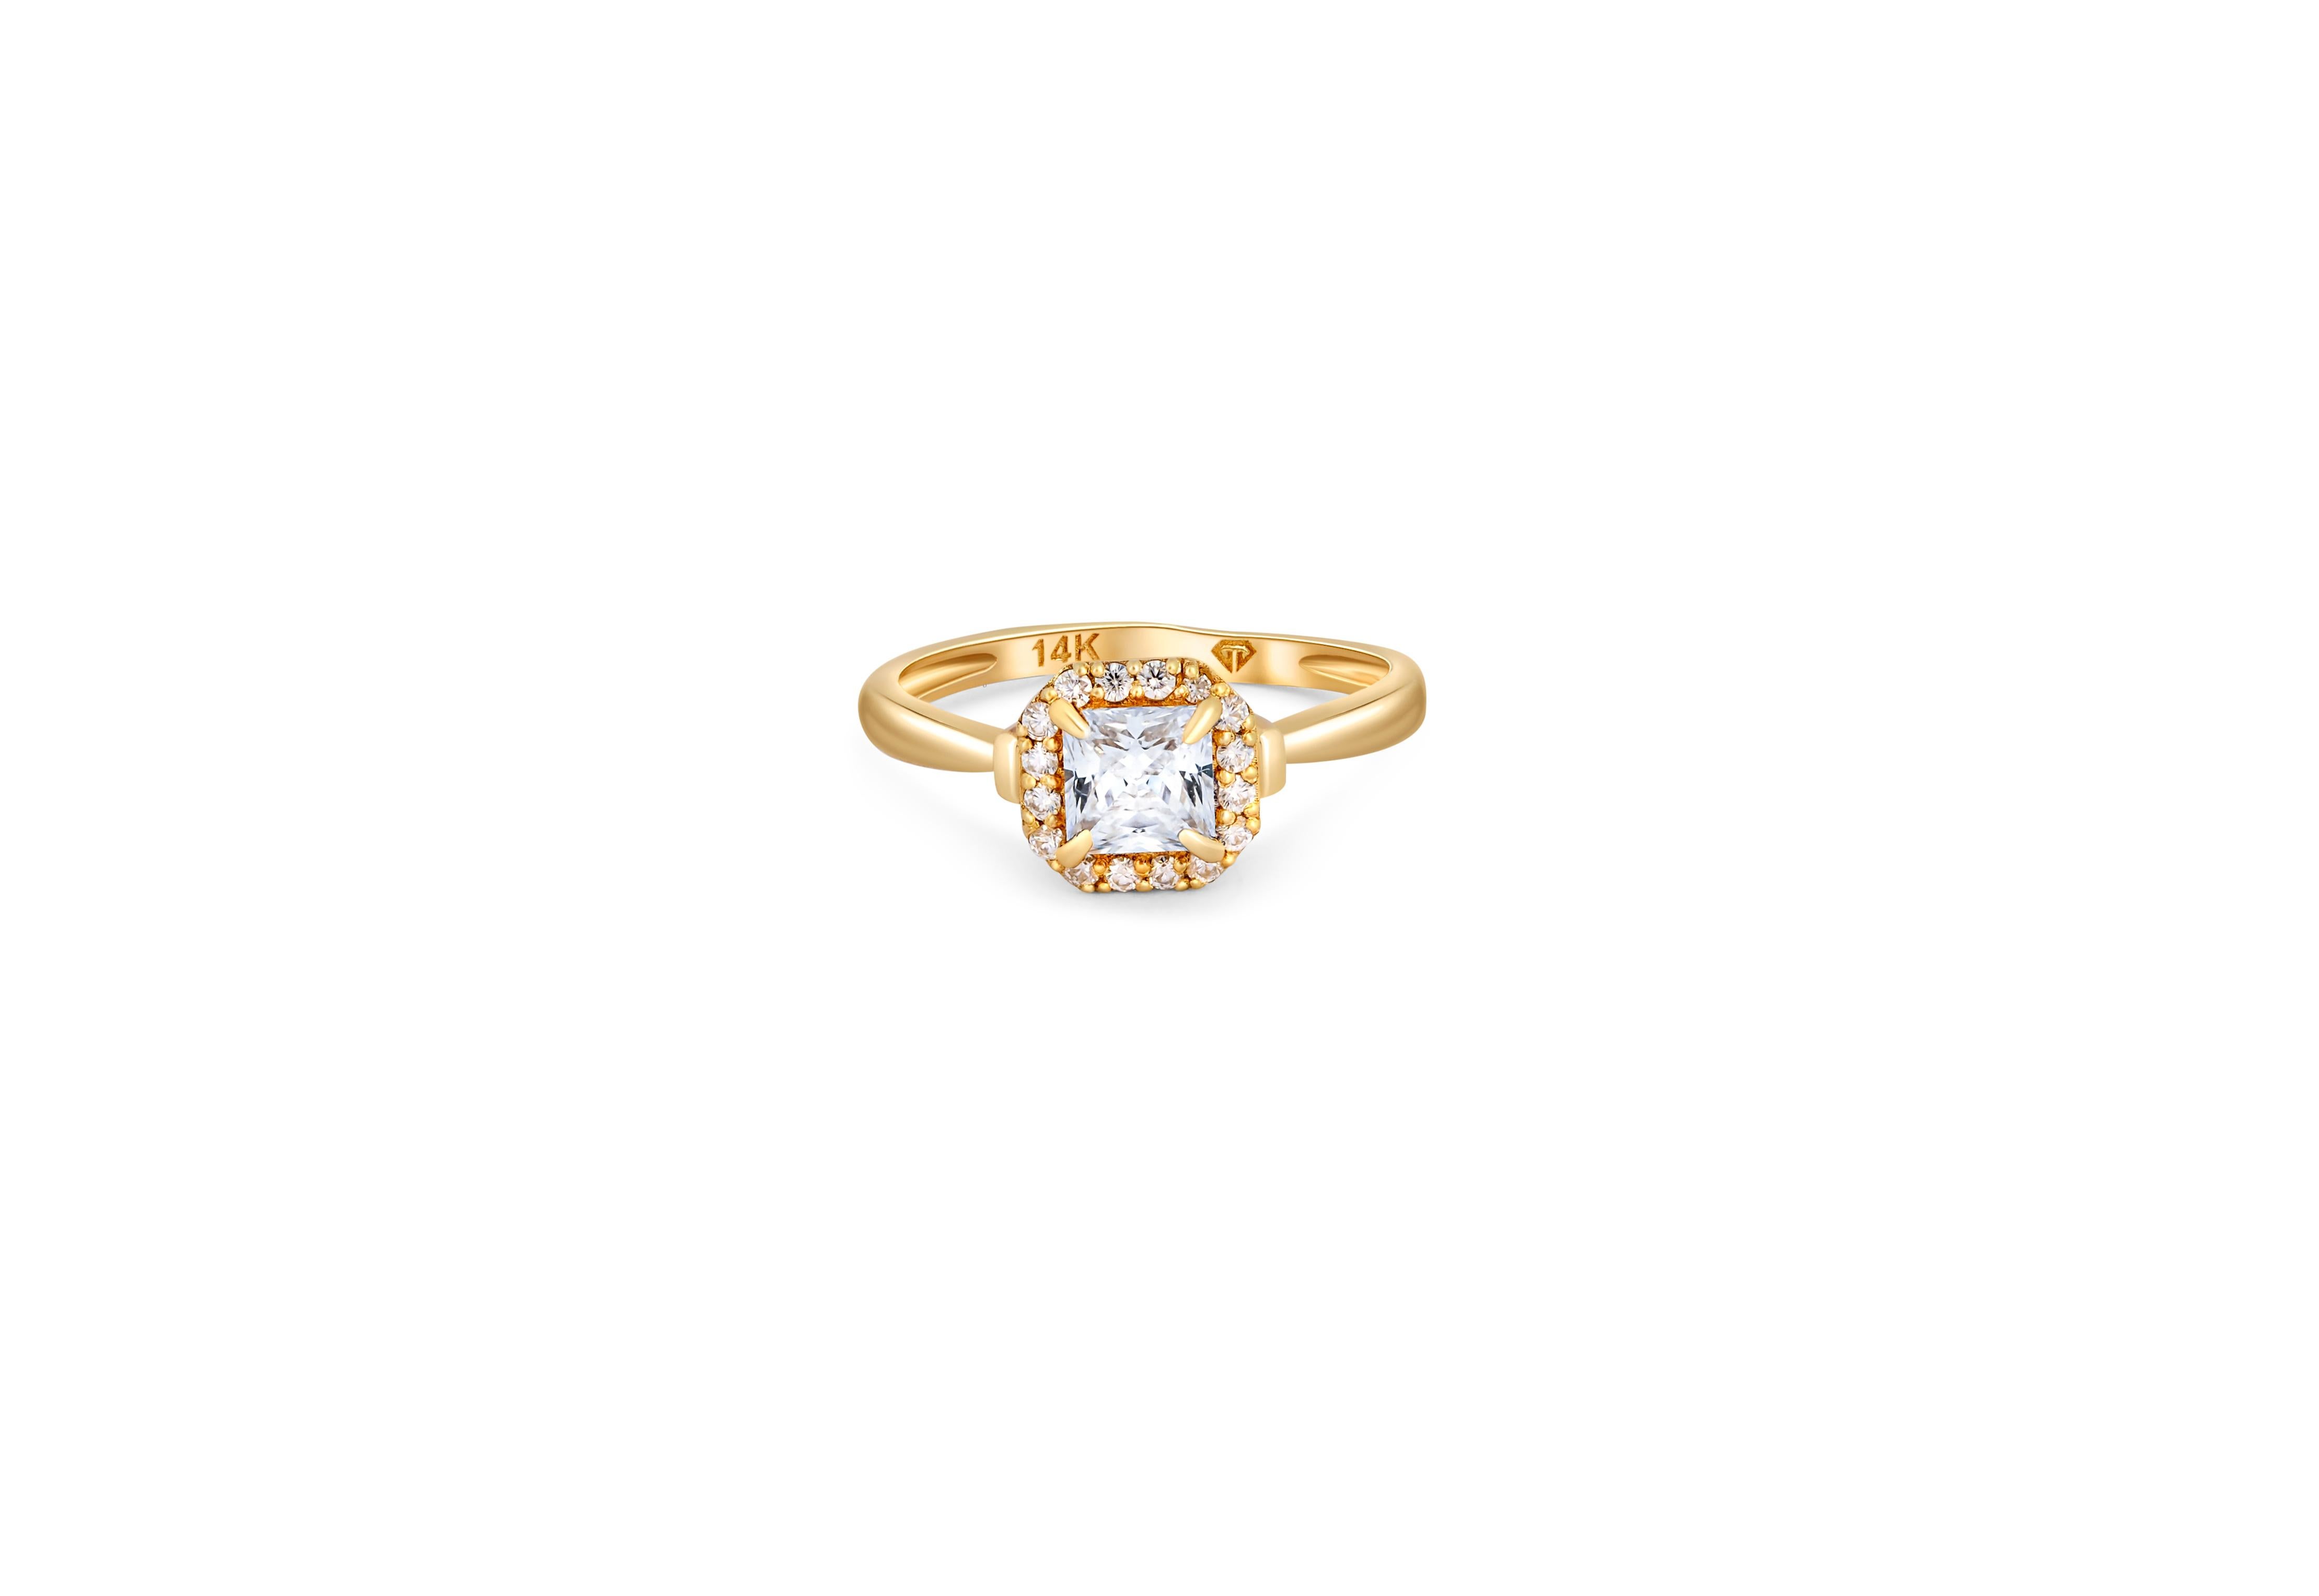 For Sale:  1 ct Princess cut moissanite 14k gold ring.  4